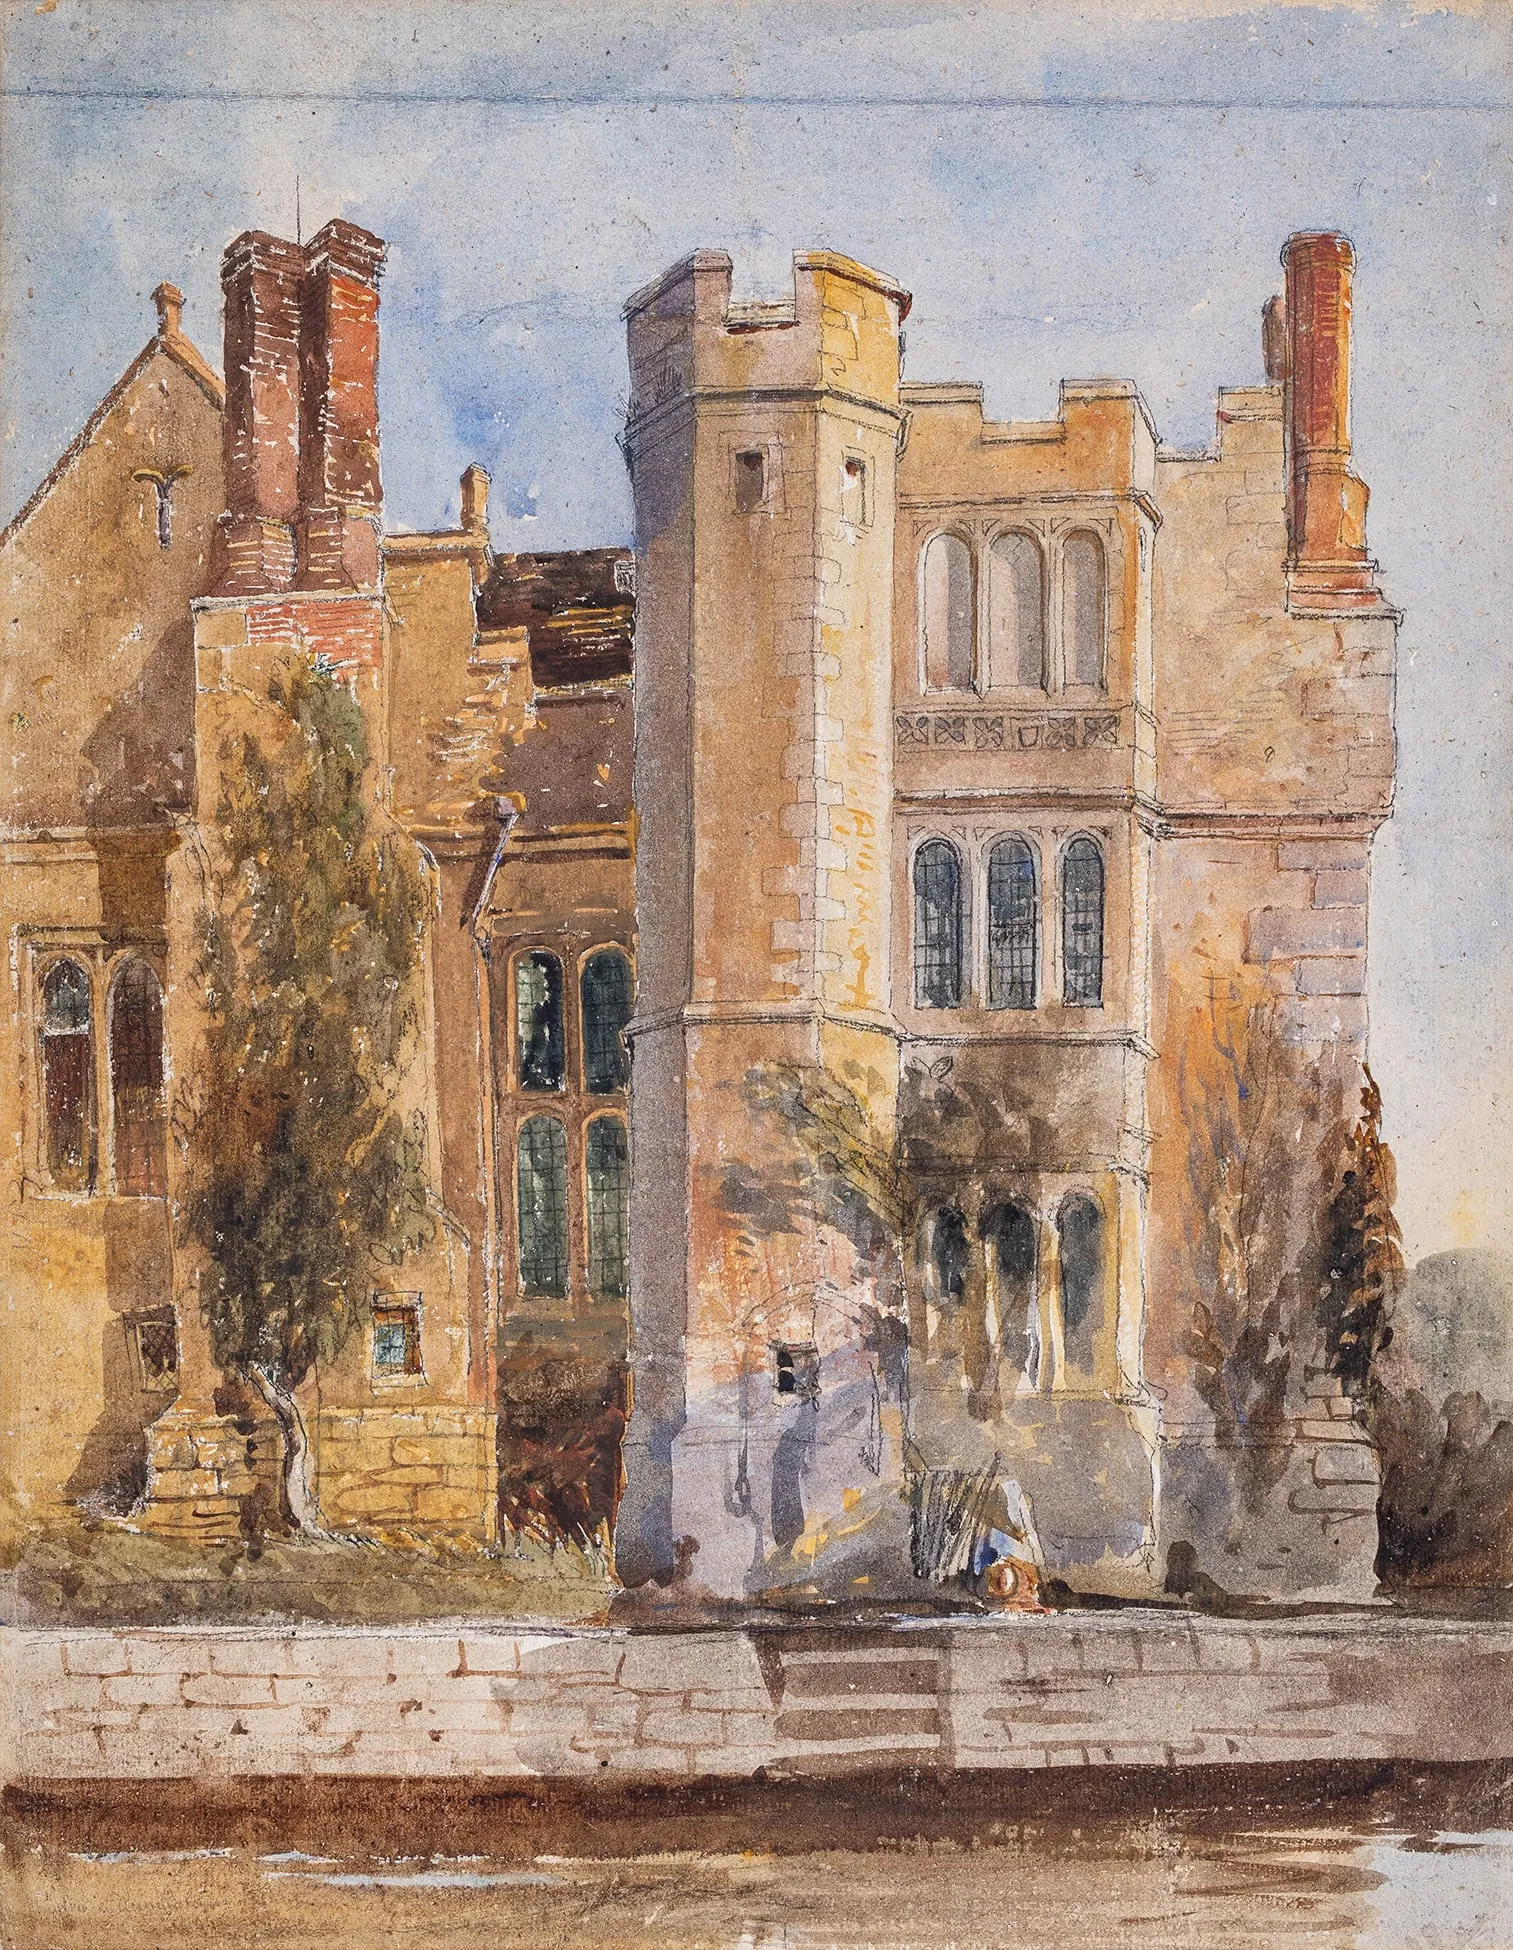 Photo showing: Offered for sale by Abbott and Holder in January 2020 when it was described as "COX David Jnr (1809-1859) Hever Castle from the Moat. Pencil and watercolour. Circa 1850. 17.25x14.25 inches."